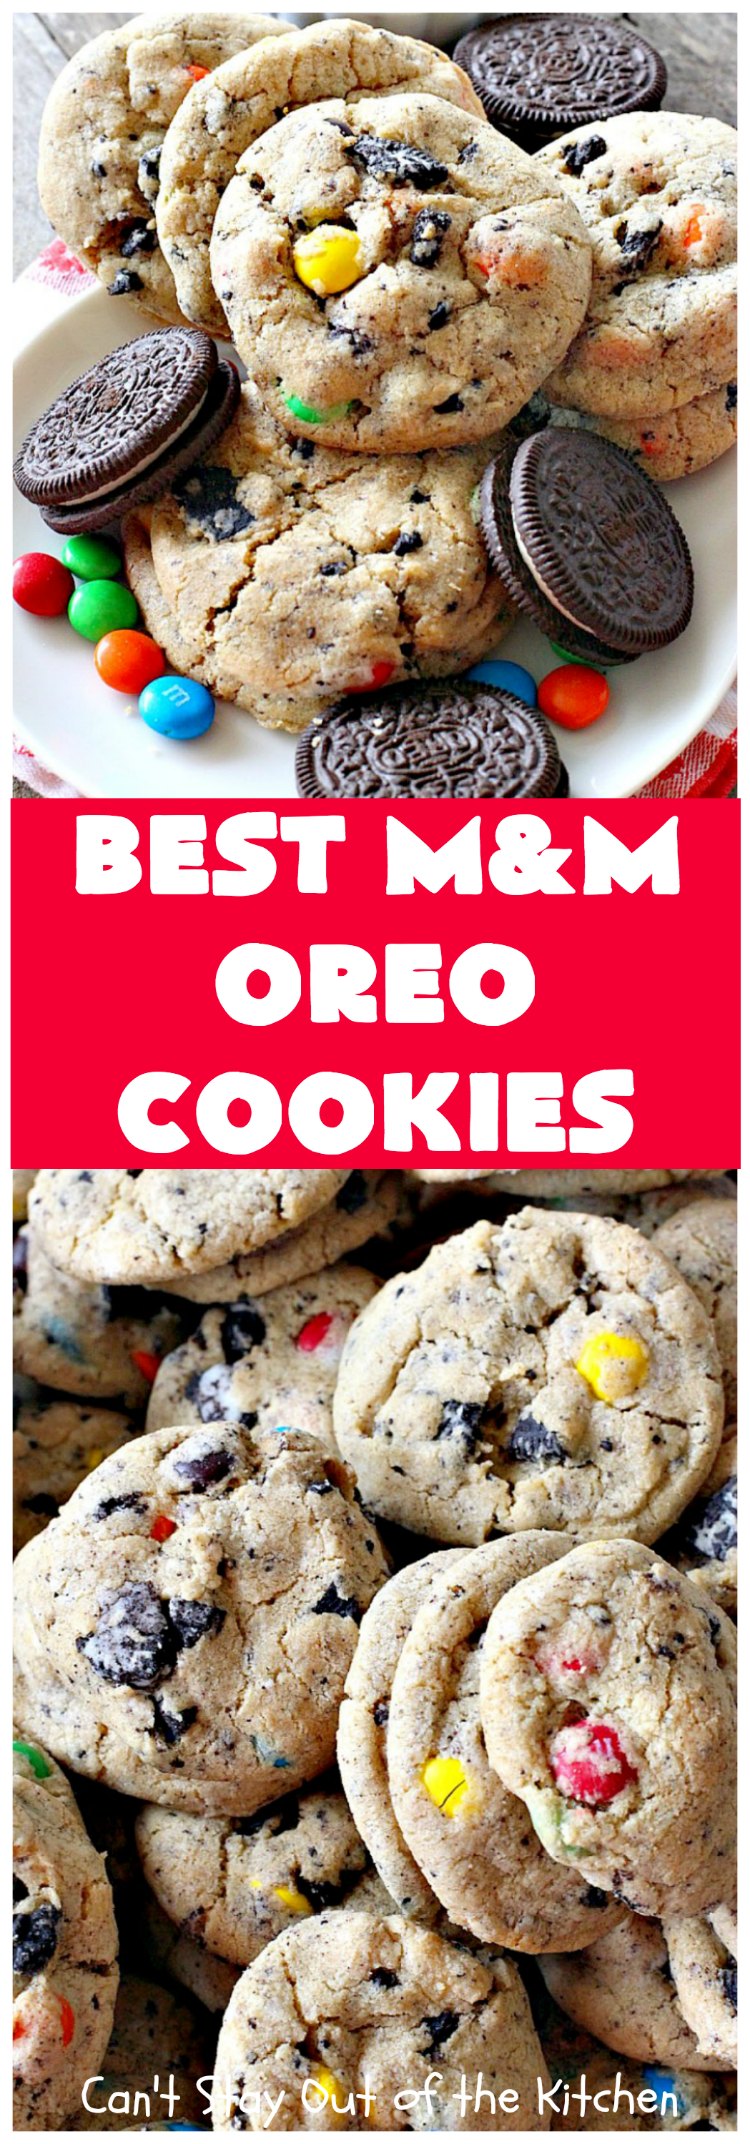 Best M&M Oreo Cookies | Can't Stay Out of the Kitchen